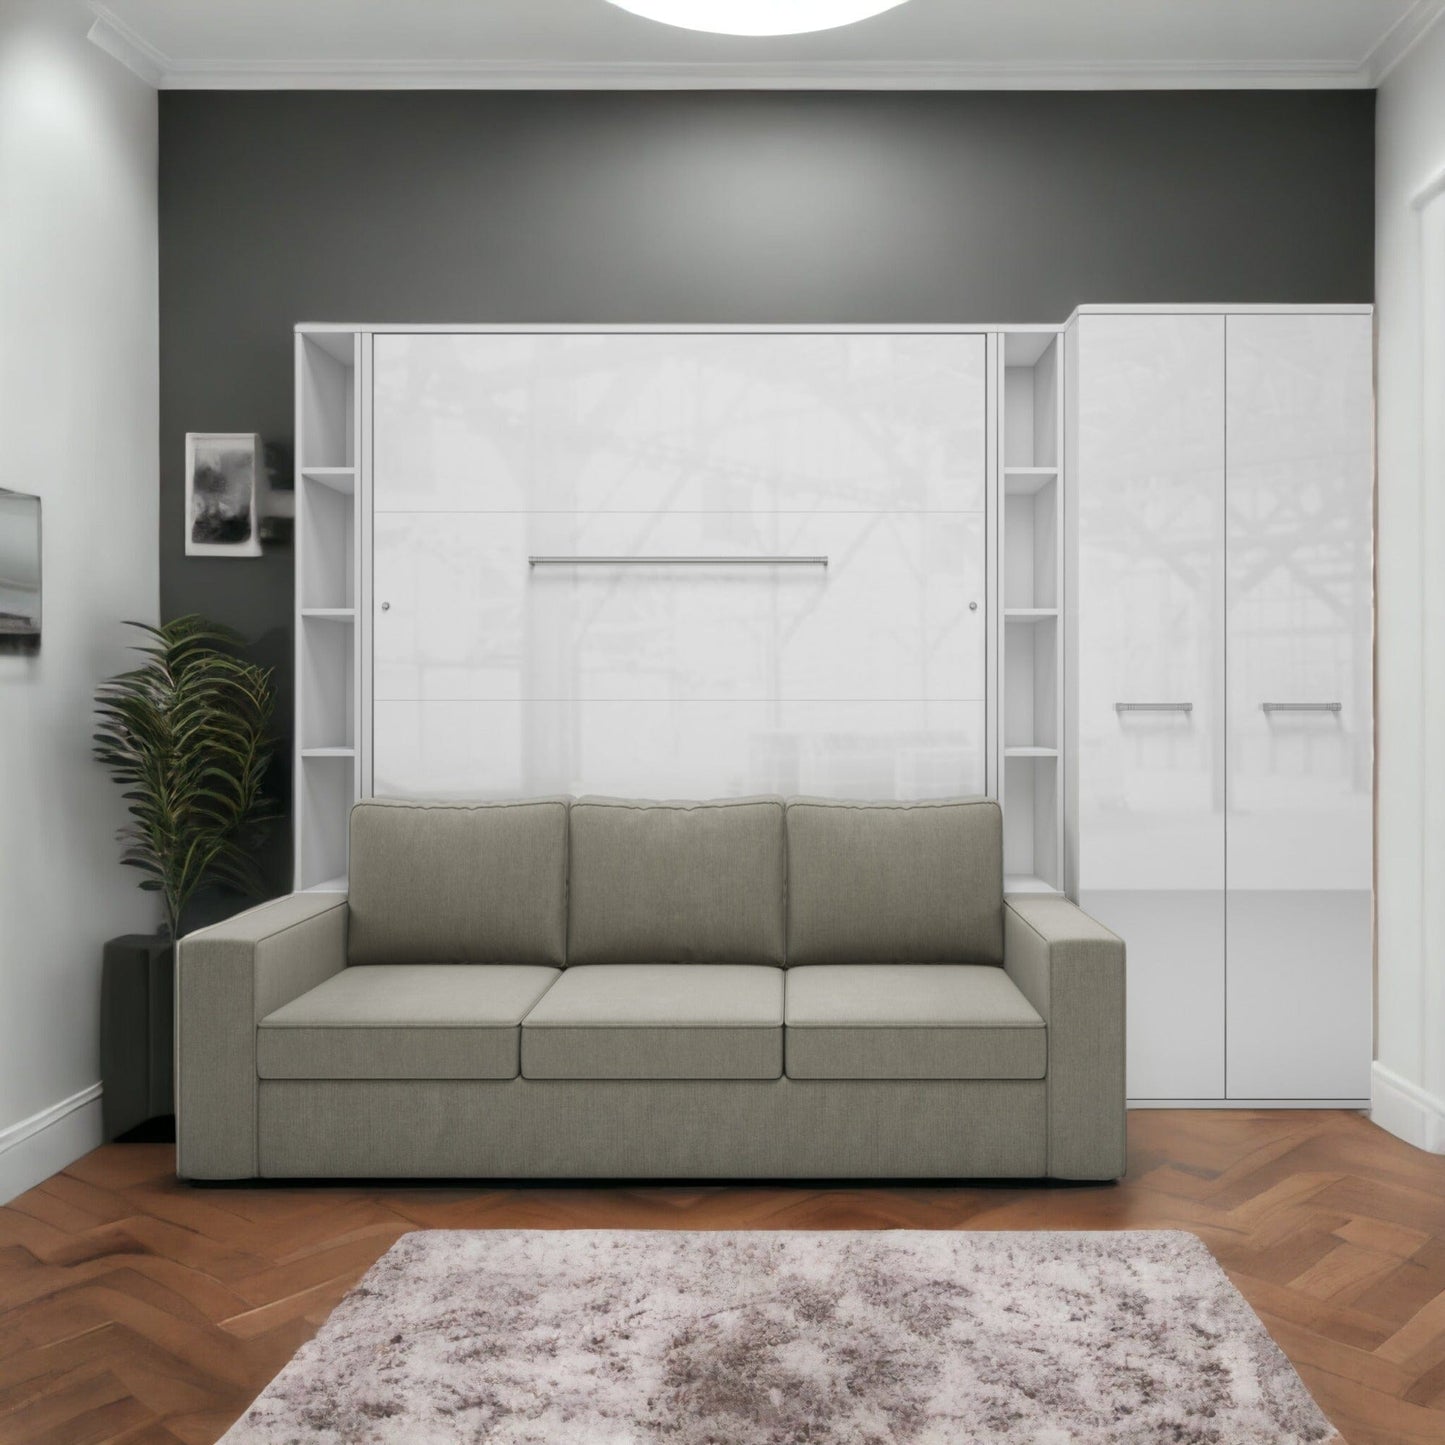 Maxima House Maxima House Vertical Queen size Murphy Bed Invento with a Sofa, two Cabinets and Wardrobe